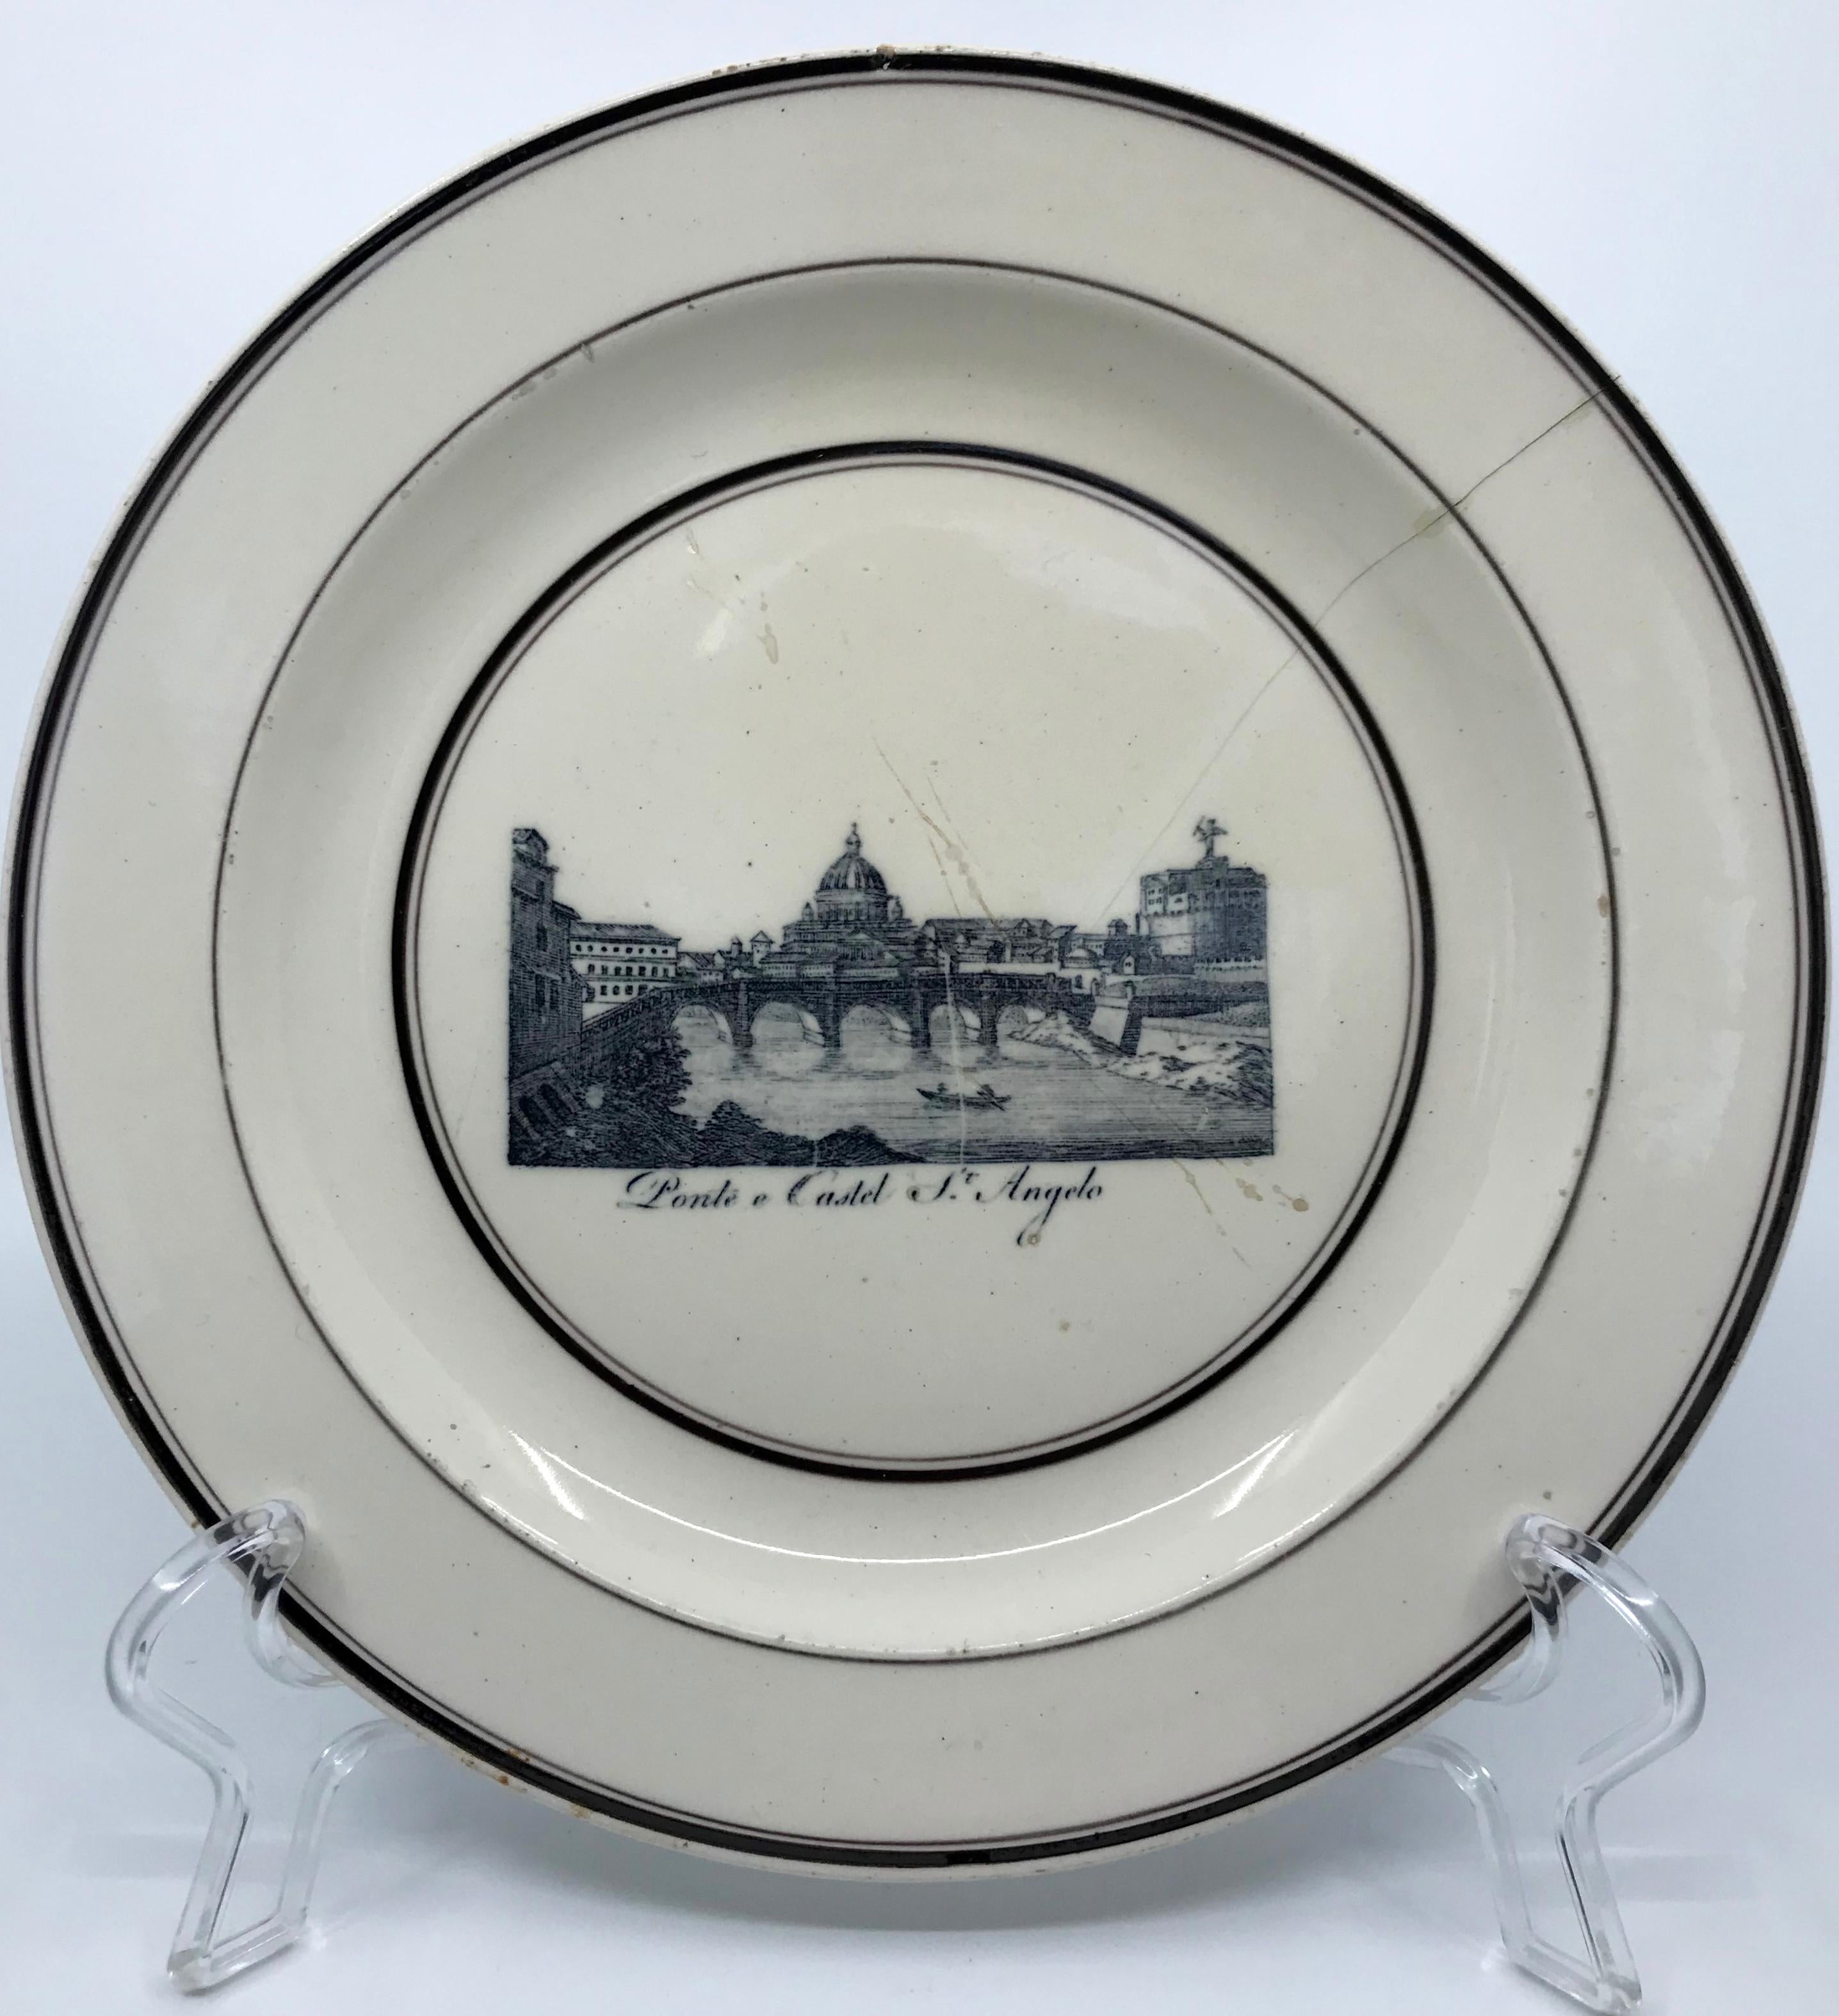 Black and white creamware Castel Sant Angelo plate. Rare Continental creamware view of the Tiber with the bridge and castle of Sant Angelo and the dome of St Peter’s beyond, Europe, late 19th century
Dimensions: 8.13